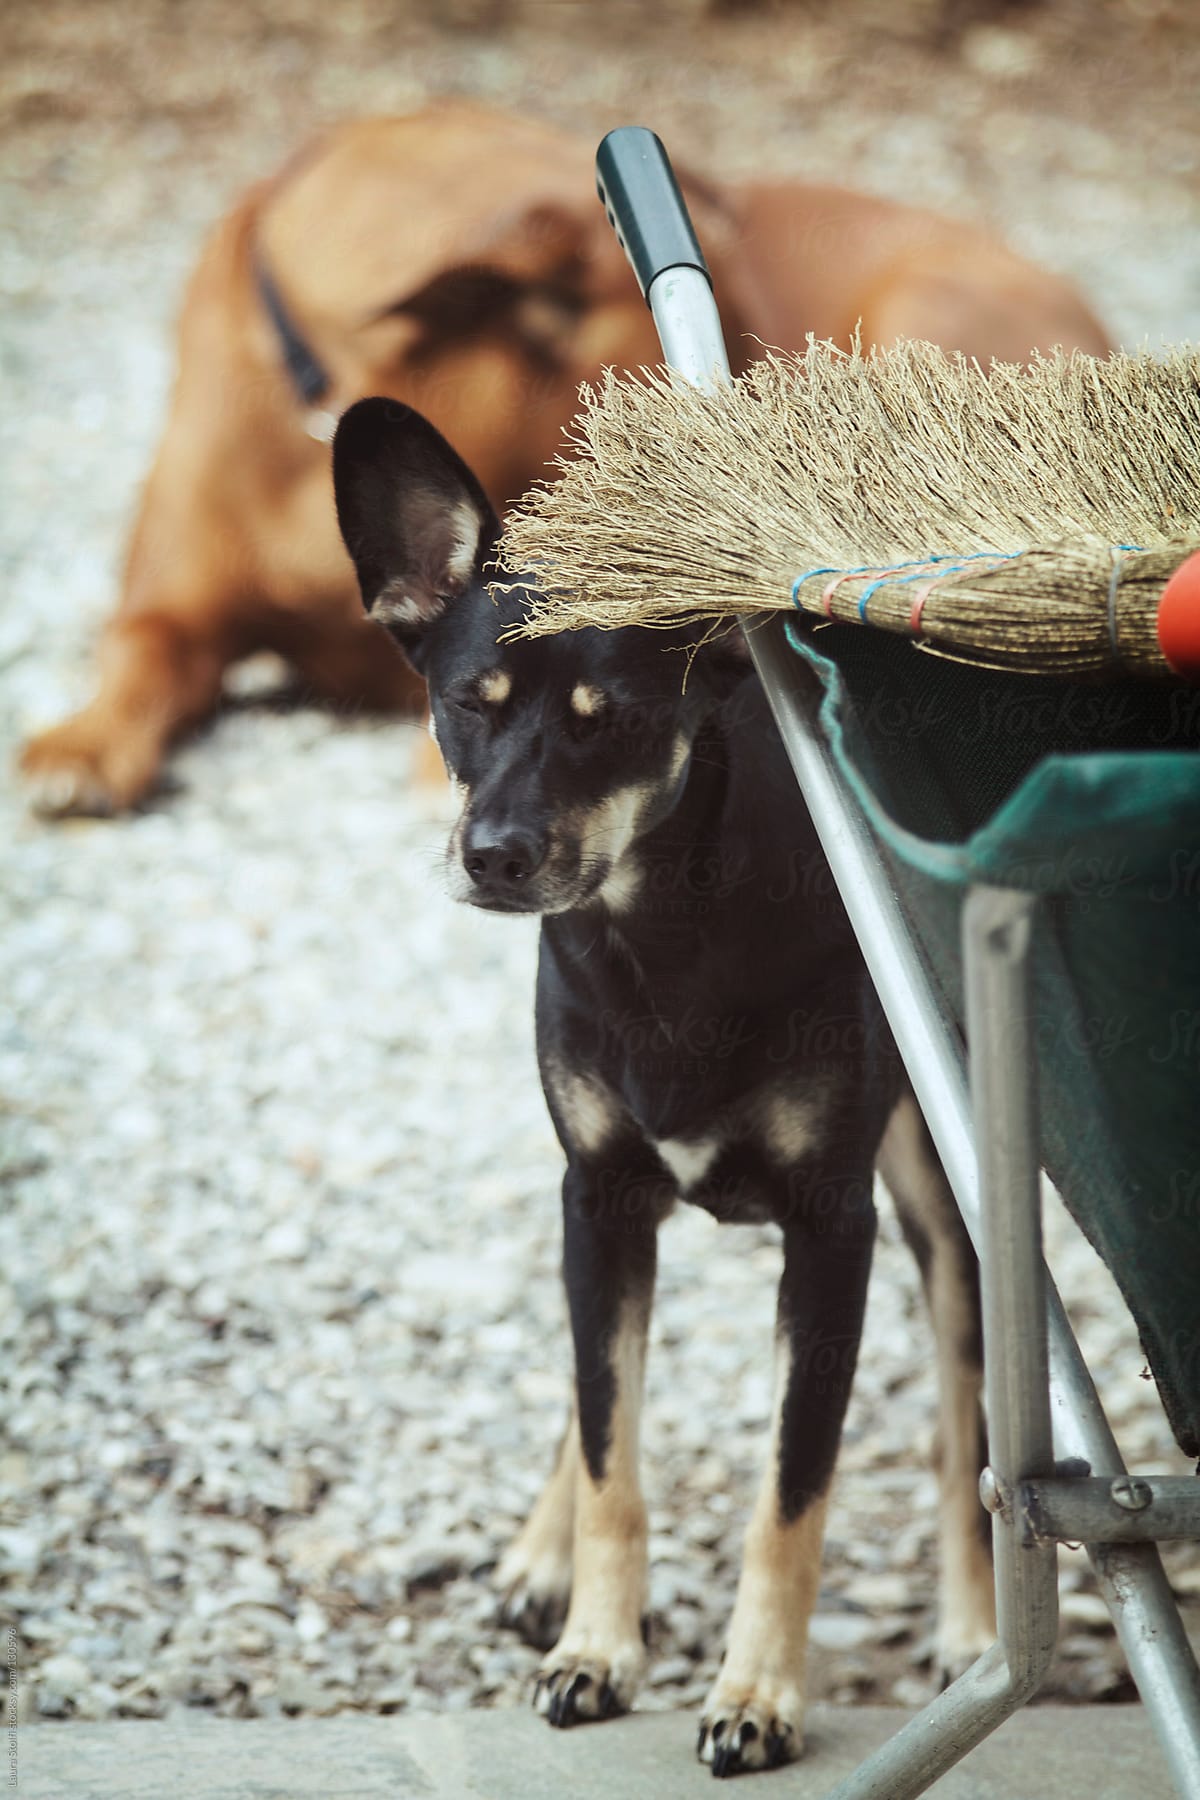 Little dog hiding under broom with eyes closed